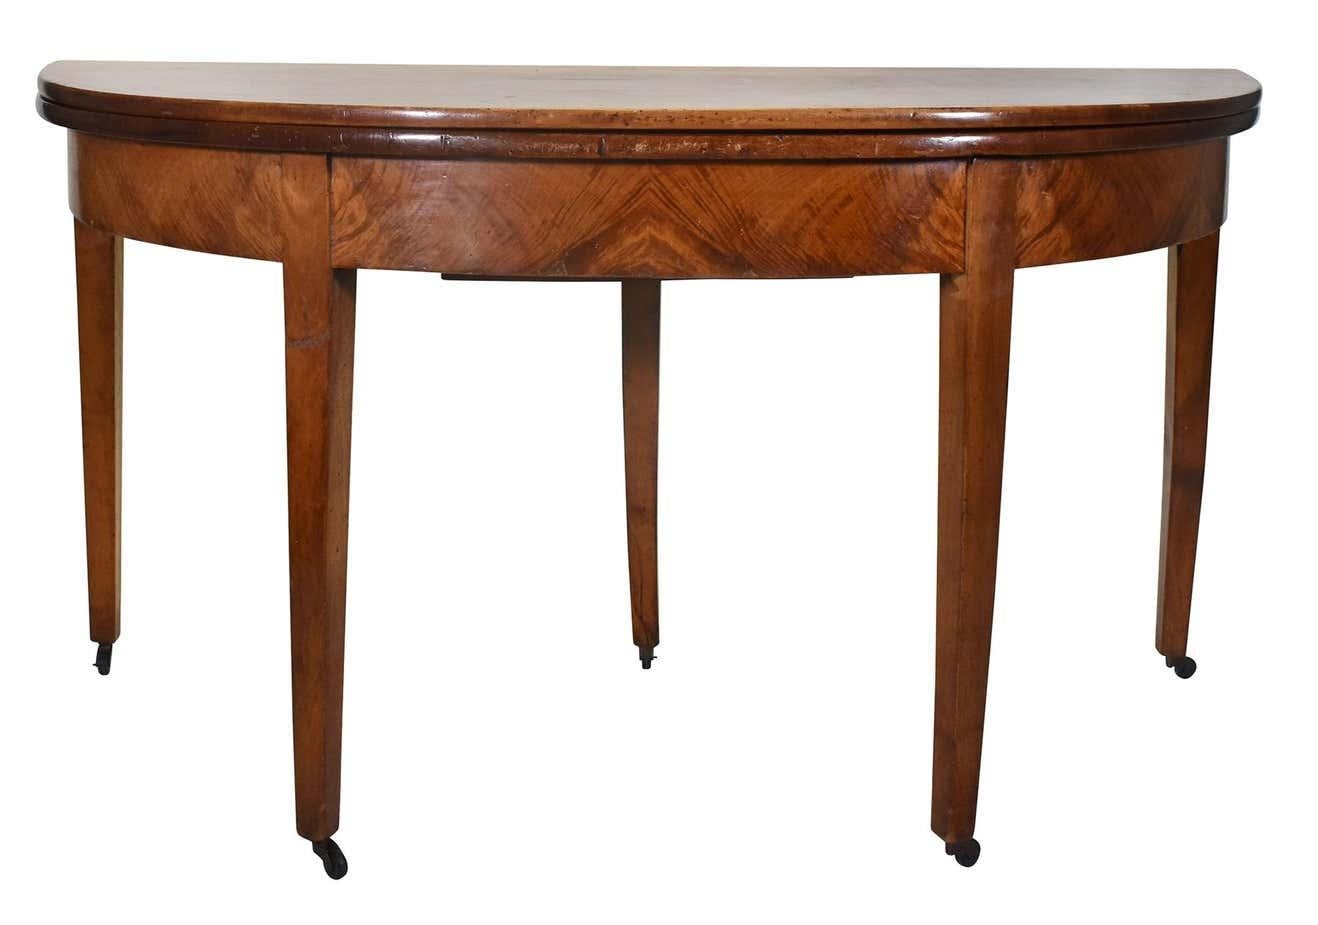 Classic Rich walnut table with straight tapering legs, brass casters, and striking wood grain of apron. The table can be used as a demilune against a wall or open the top to use as an oval table.

Dimensions below are when closed.  

Dimensions